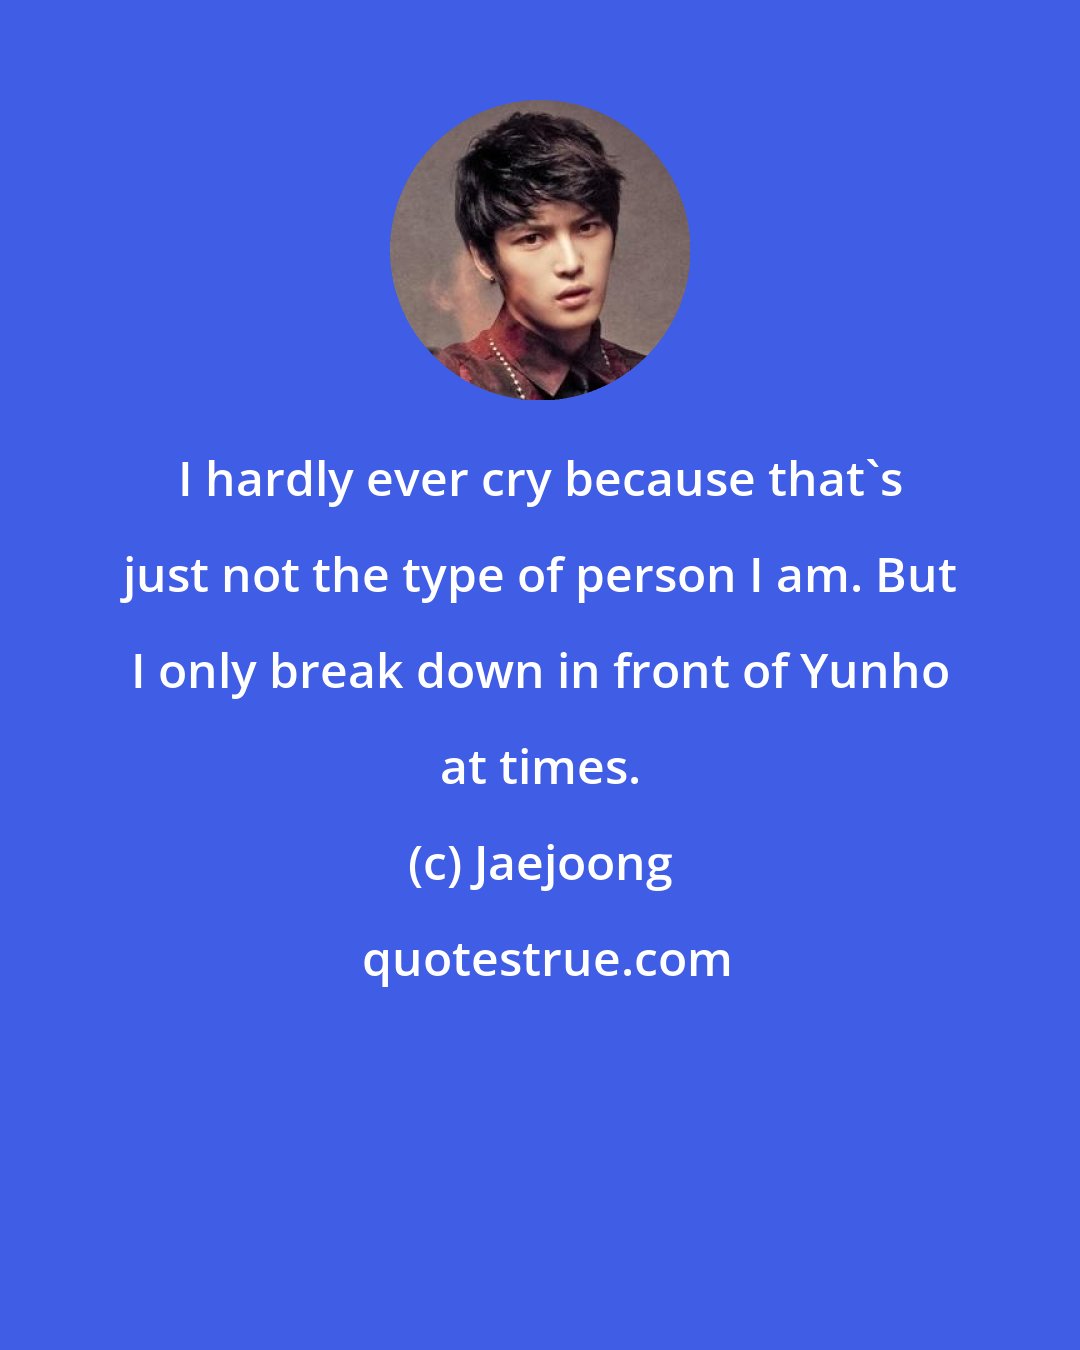 Jaejoong: I hardly ever cry because that's just not the type of person I am. But I only break down in front of Yunho at times.